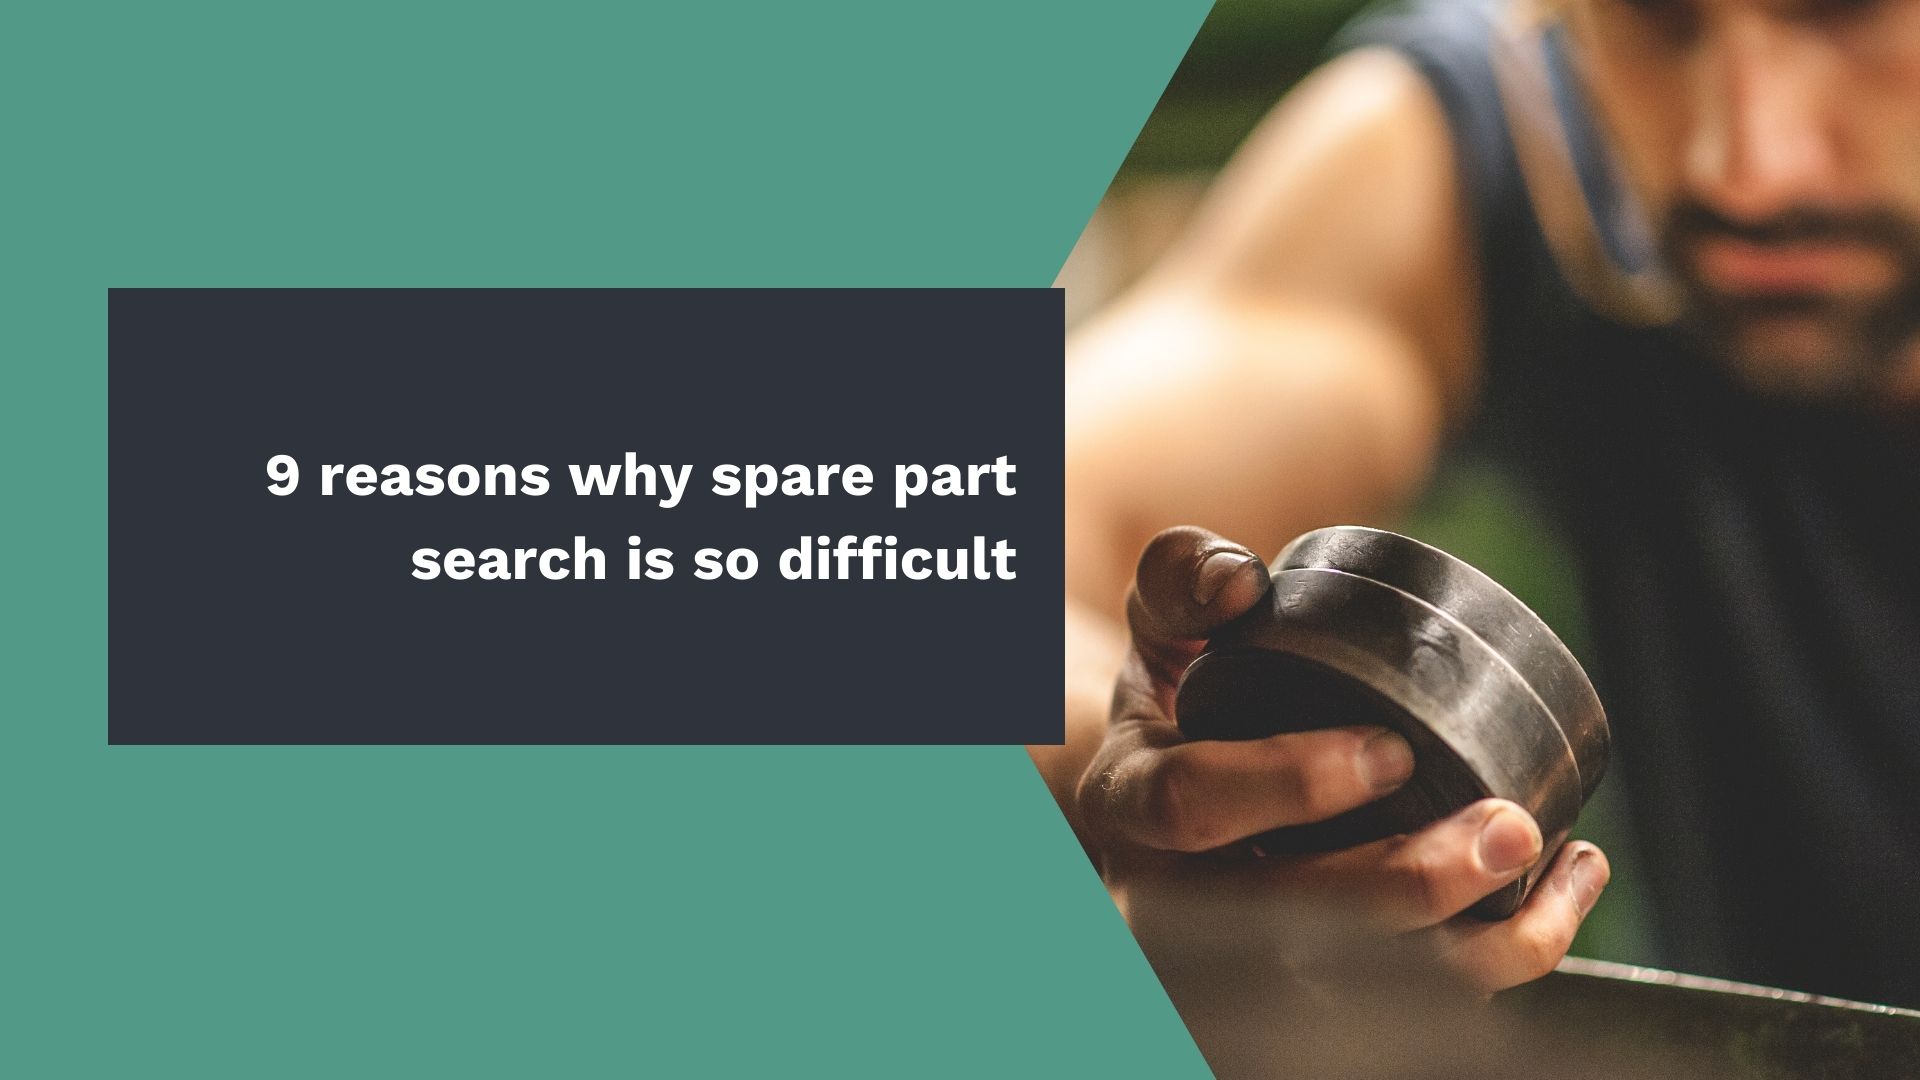 9 reasons why spare part search is so difficult